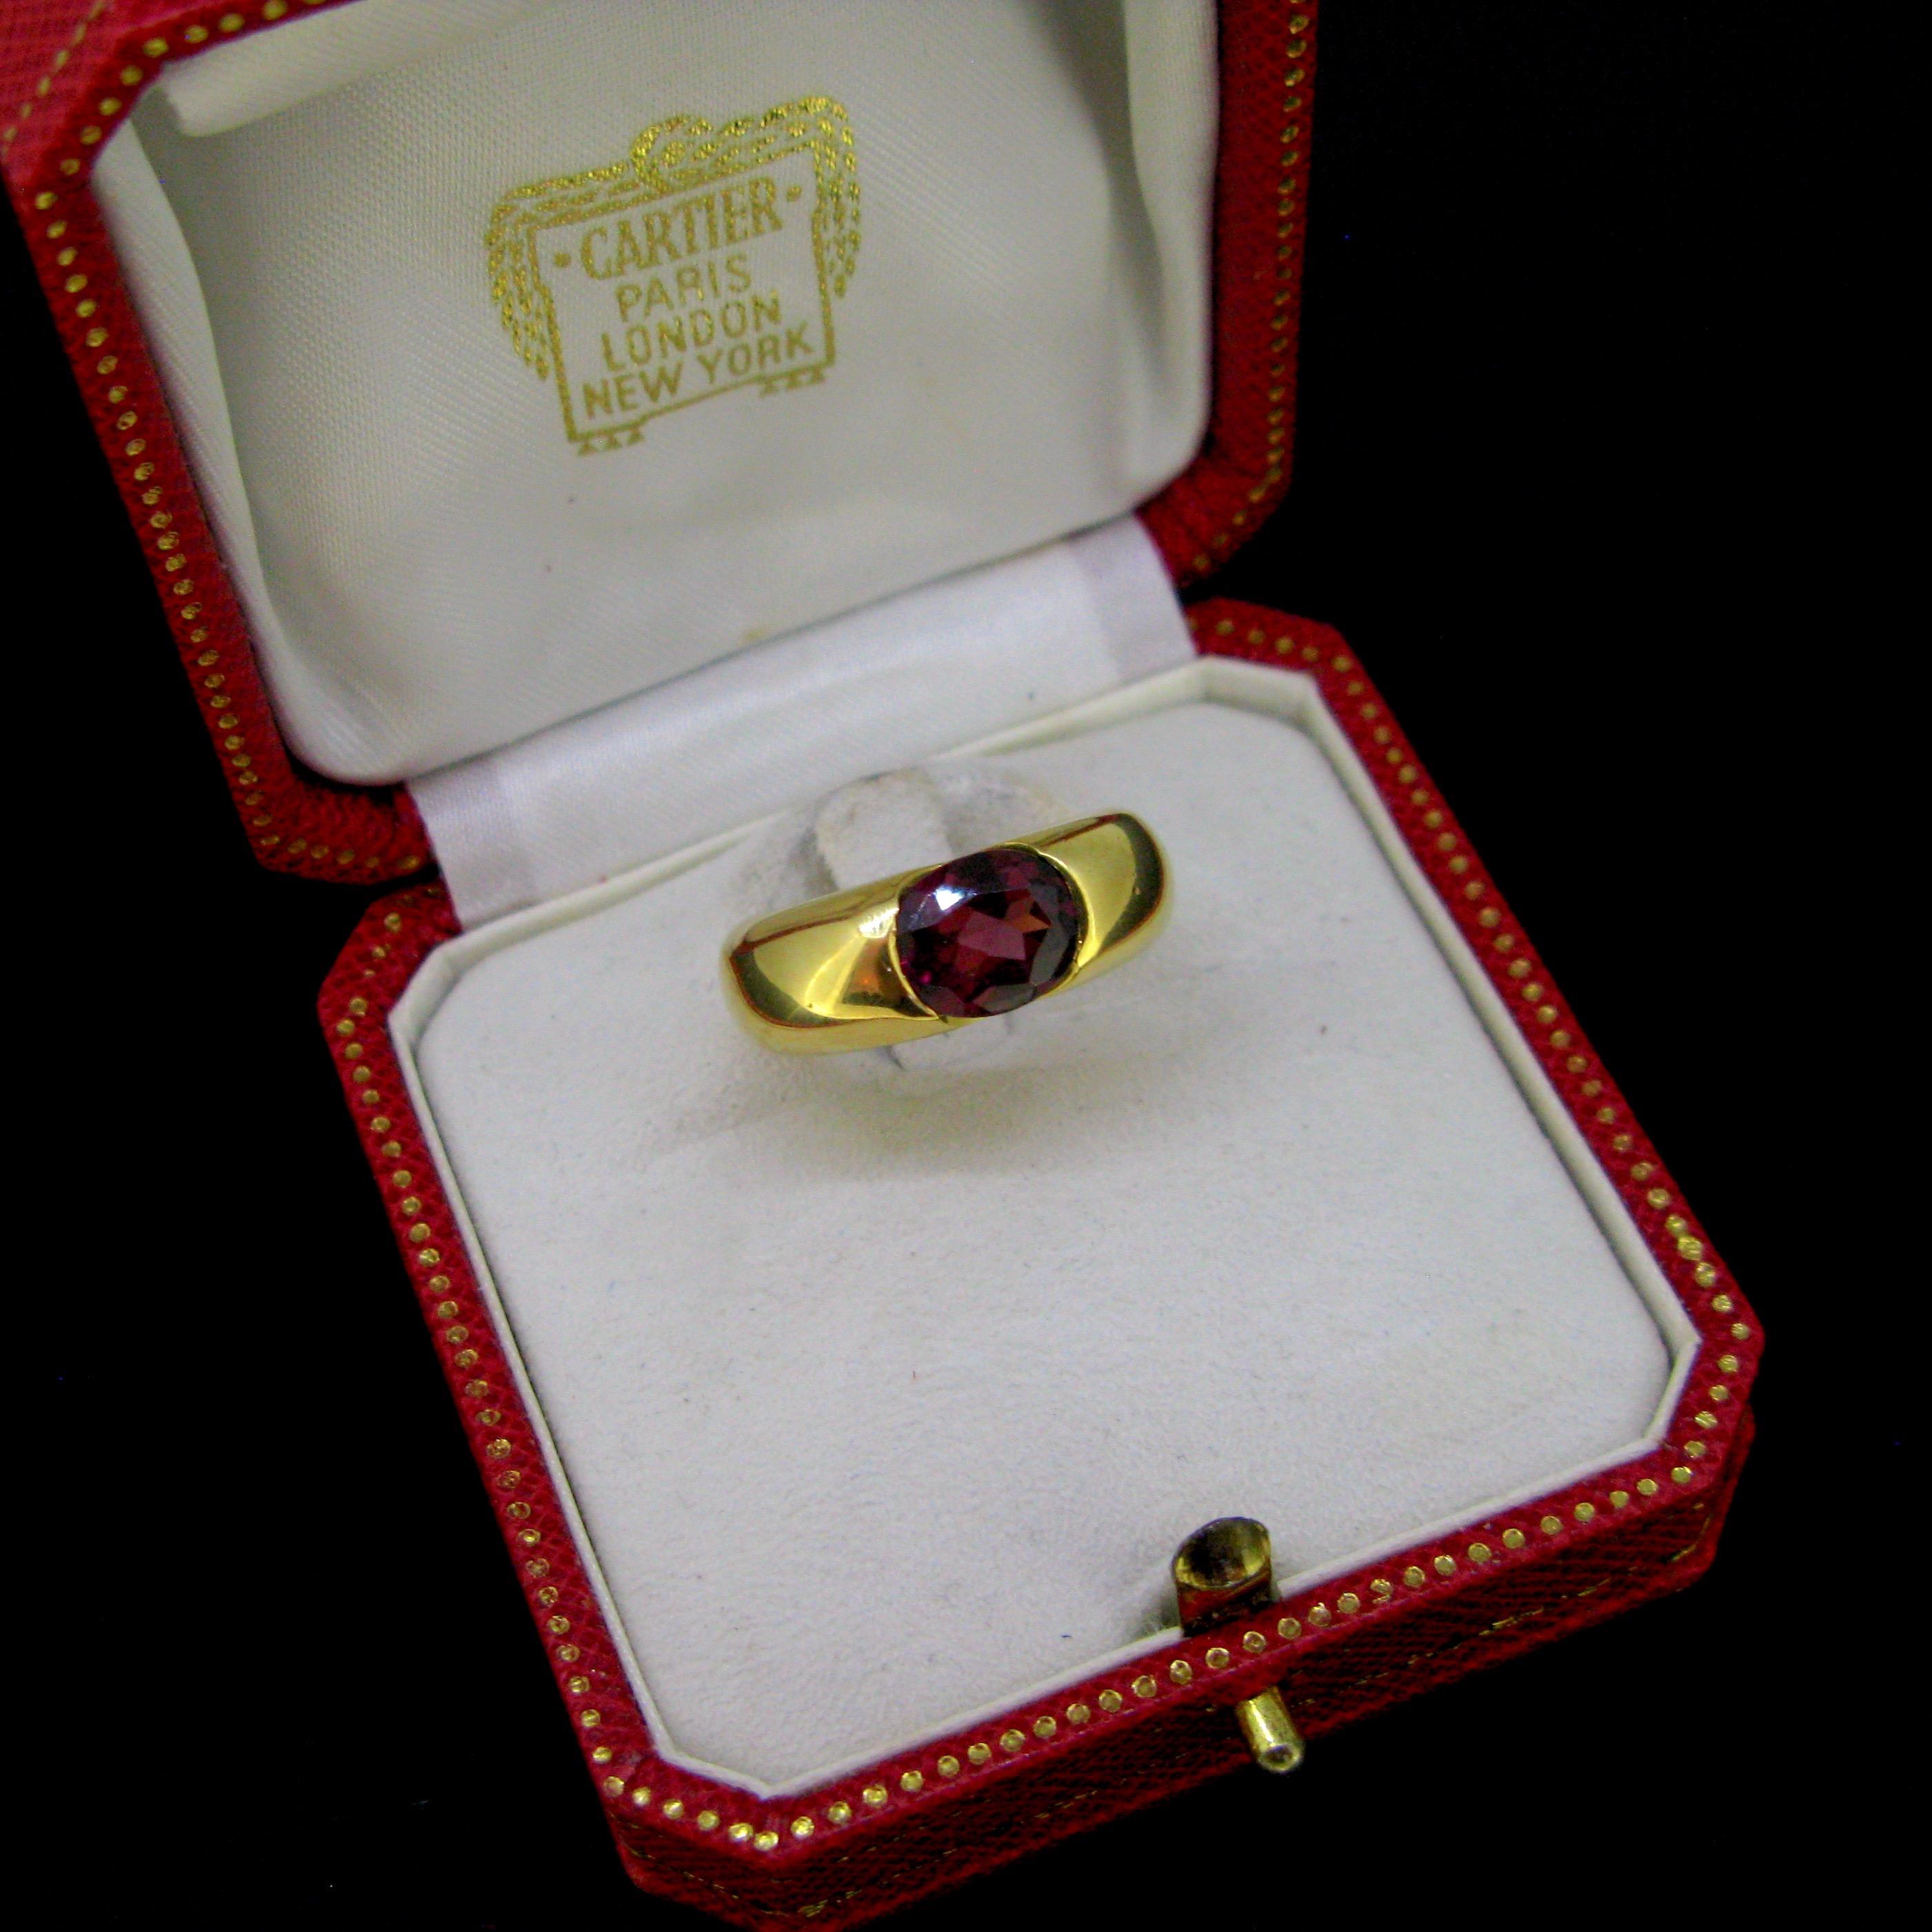 This bold ring from the Ellipse collection is made in 18kt yellow gold. It is set with a luscious garnet, weighing approximately 2ct. It is in very good condition. The gold is smooth and shiny. The ring comes with its original box. It is signed and